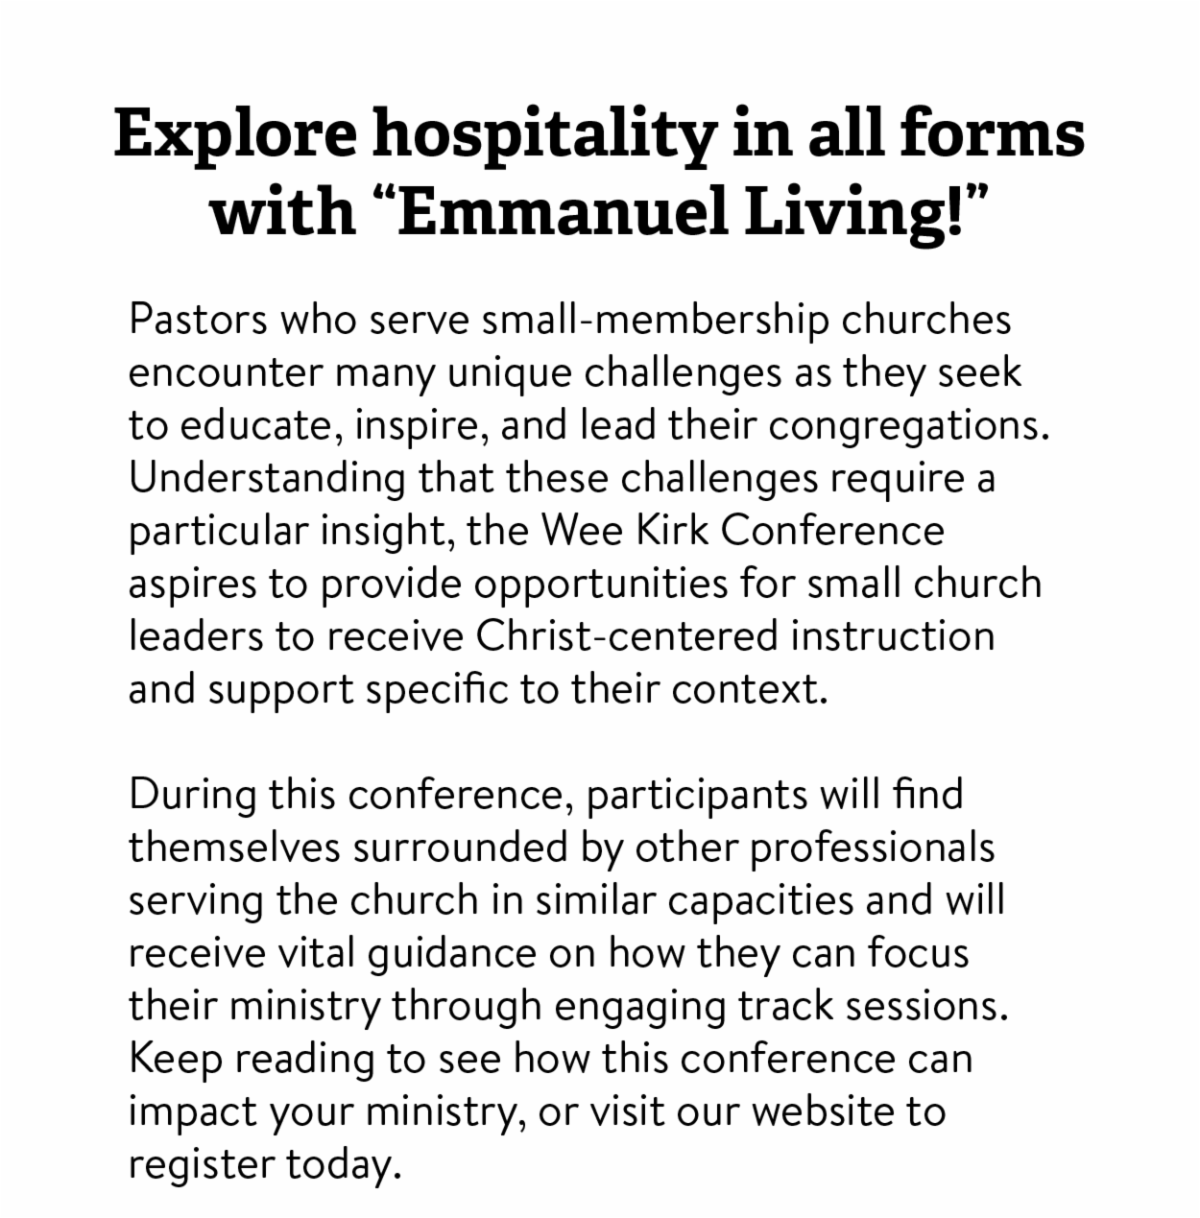 Explore hospitality in all forms with "Emmanuel Living!" - Pastors who serve small-membership churches encounter many unique challenges as they seek to educate, inspire, and lead their congregations. Understanding that these challenges require a particular insight, the Wee Kirk Conference aspires to provide opportunities for small church leaders to receive Christ-centered instruction and support specific to their context.  During this conference, participants will find themselves surrounded by other professionals serving the church in similar capacities and will receive vital guidance on how they can focus their ministry through engaging track sessions. Keep reading to see how this conference can impact your ministry, or visit our website to register today. 